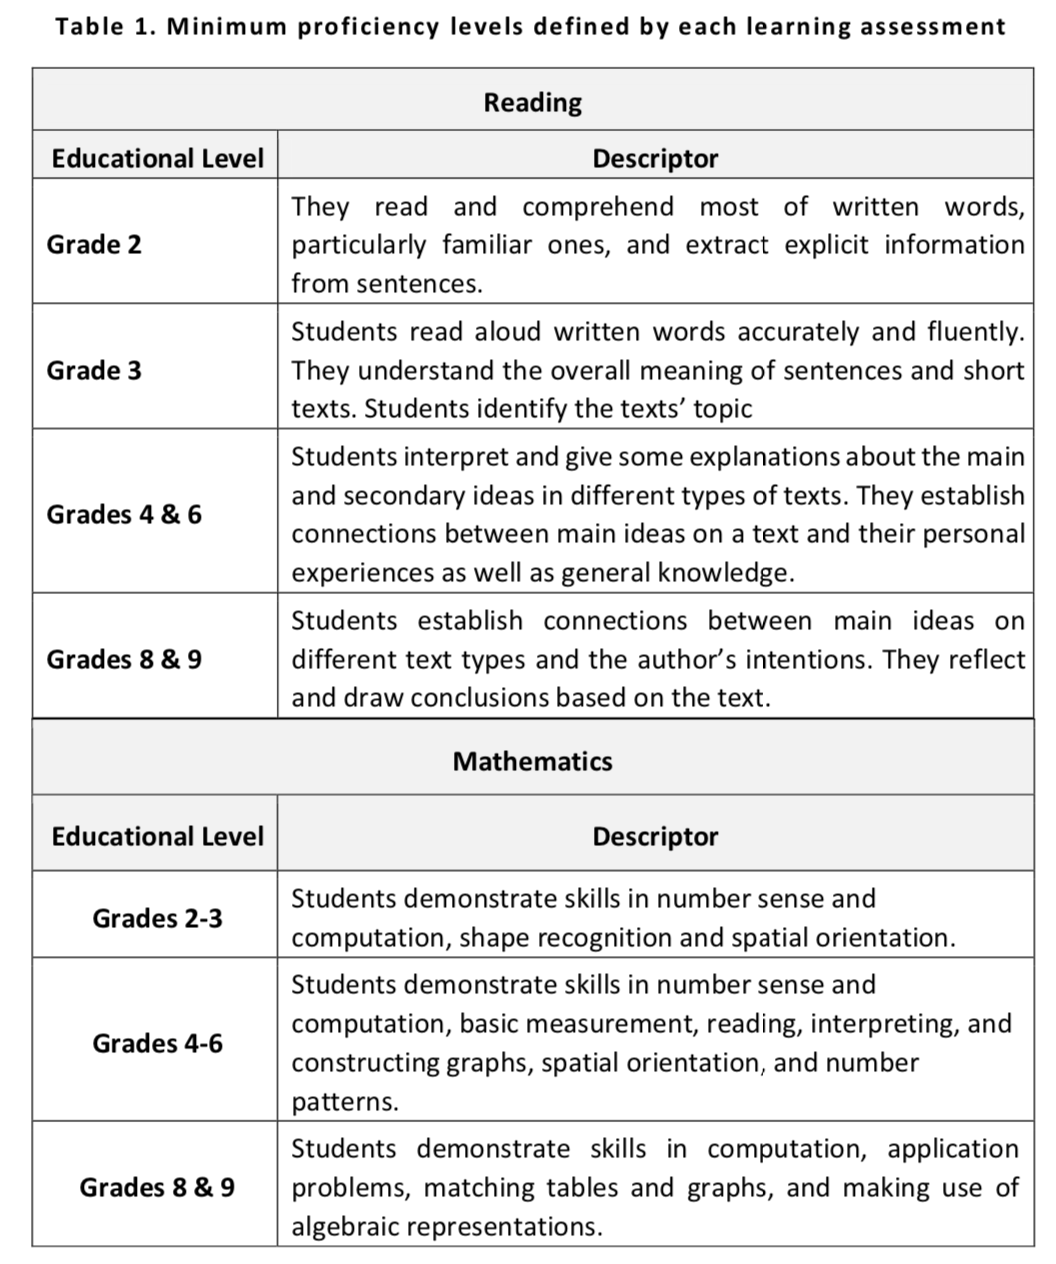 Minimum proficiency levels defined by each learning assessment